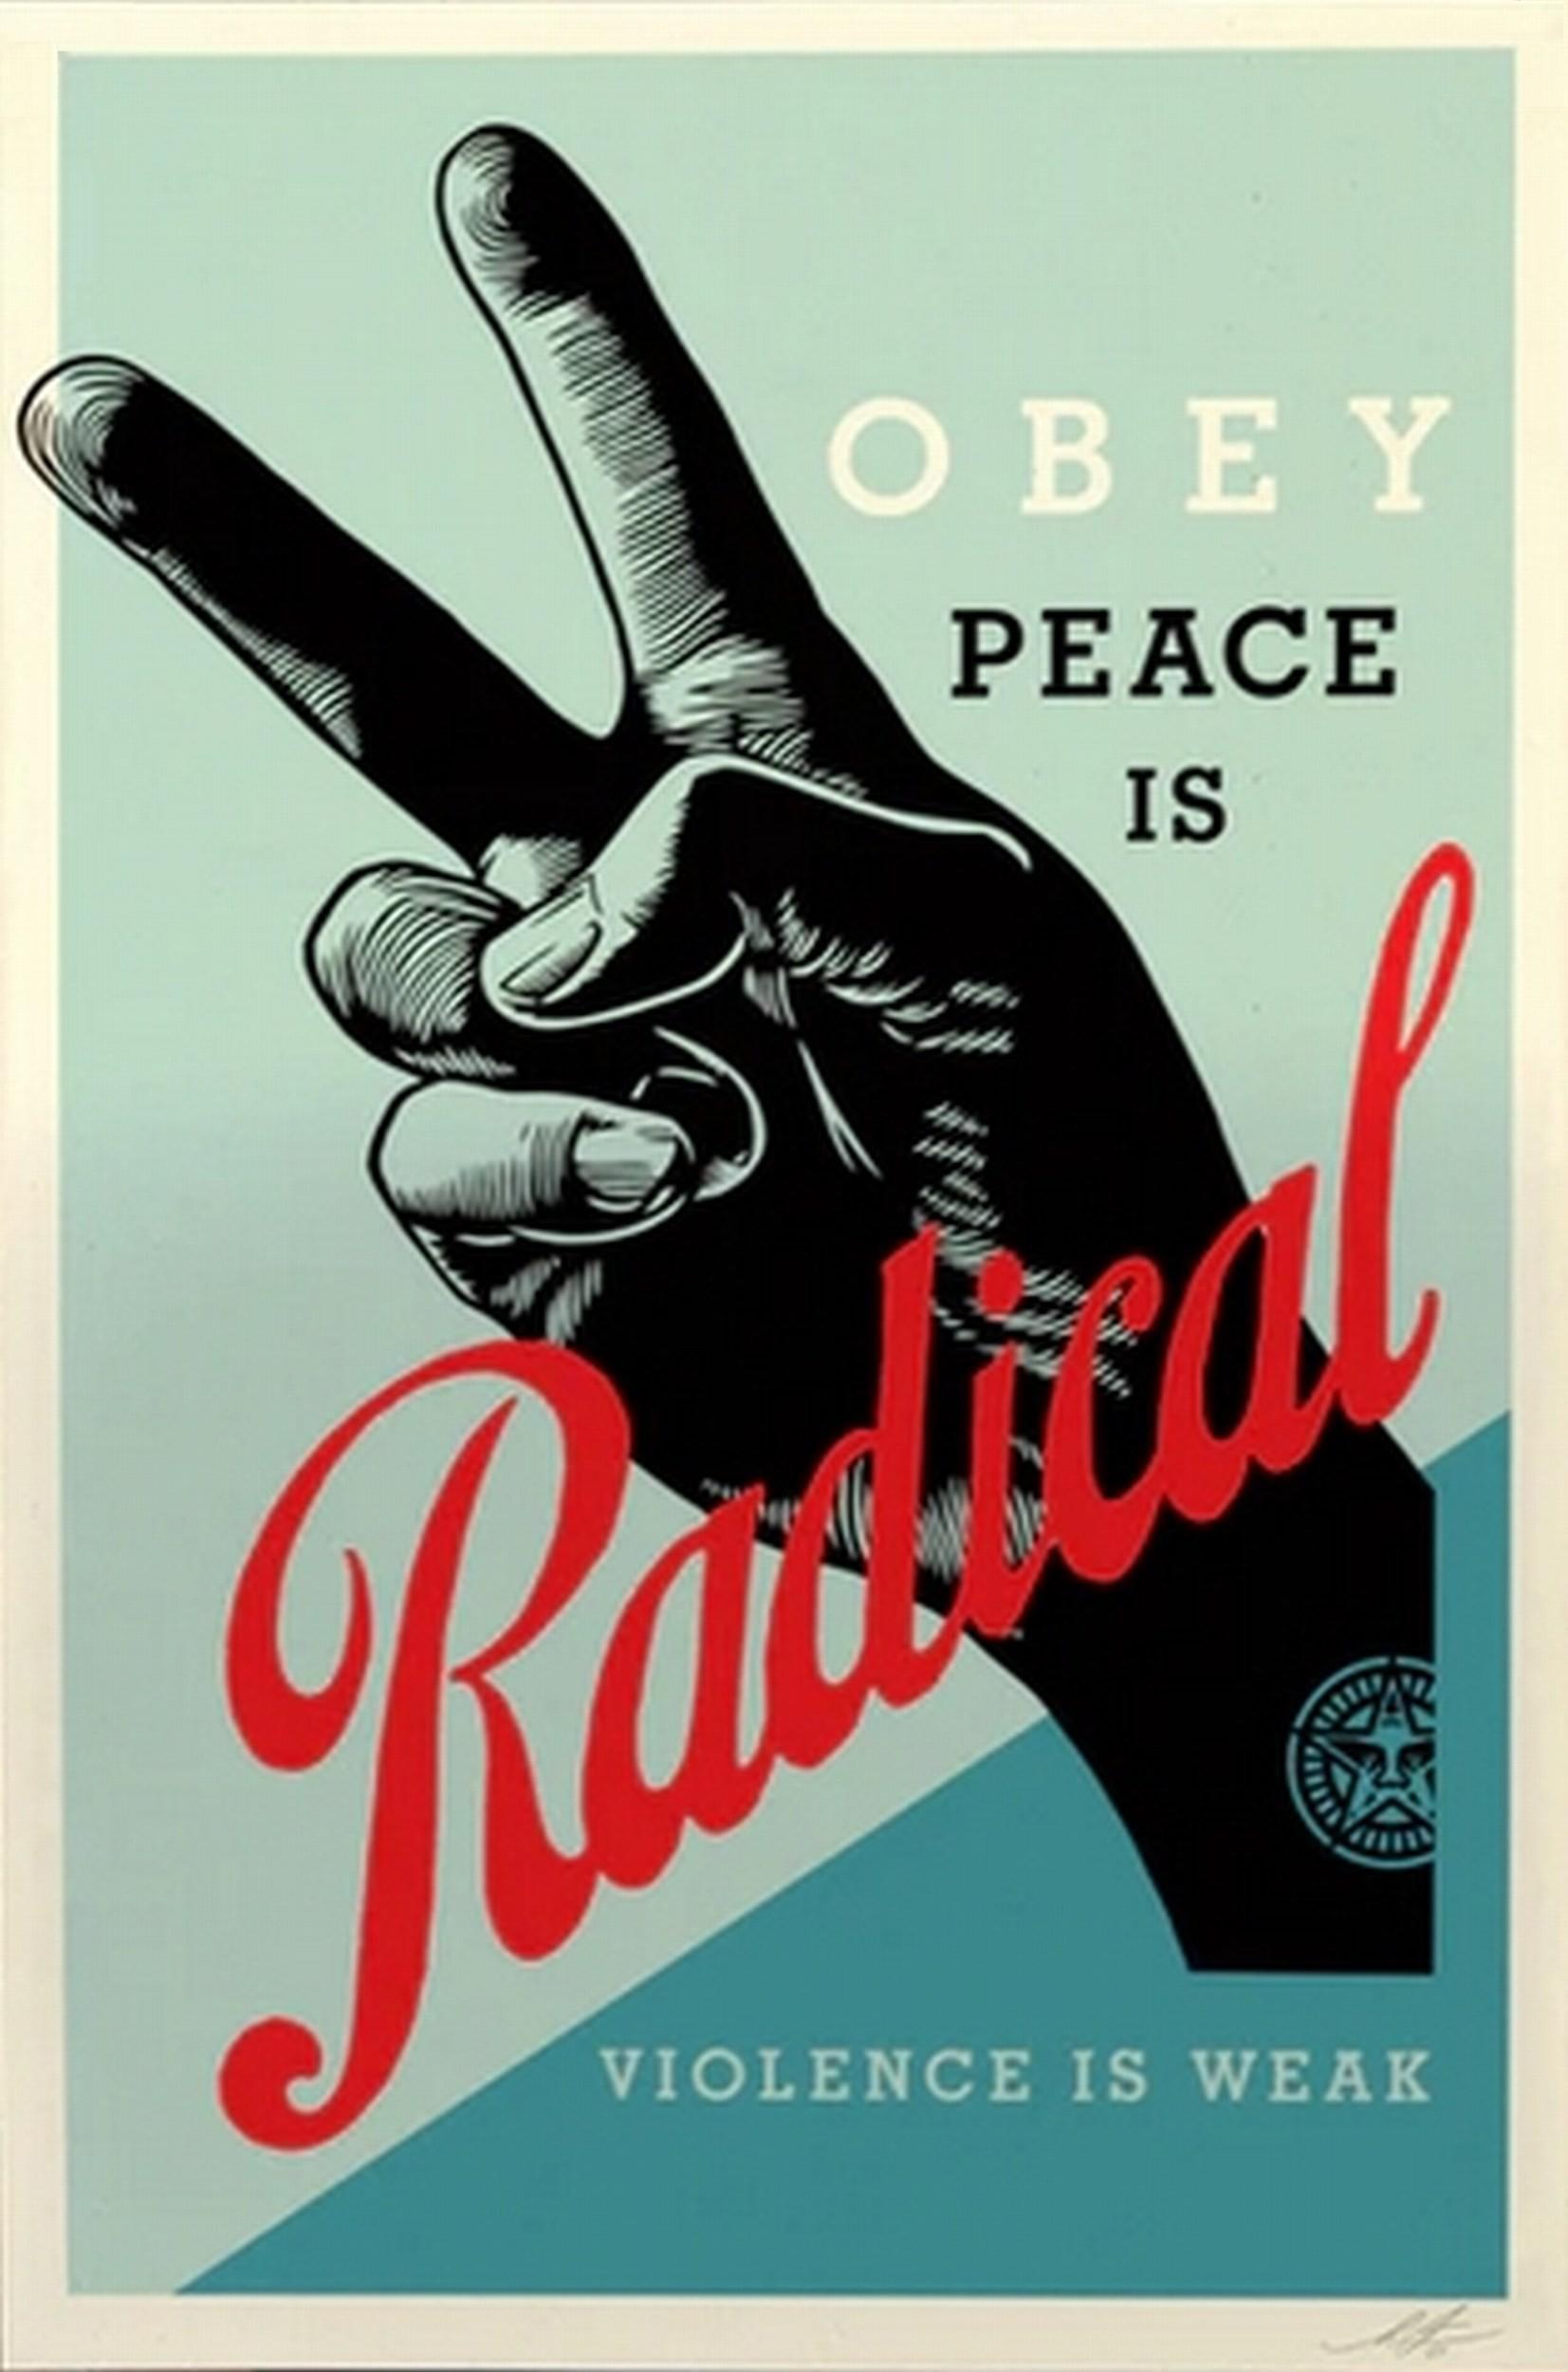 Radical Peace (Diplomacy, Creativity, Defending Rights) - Print by Shepard Fairey